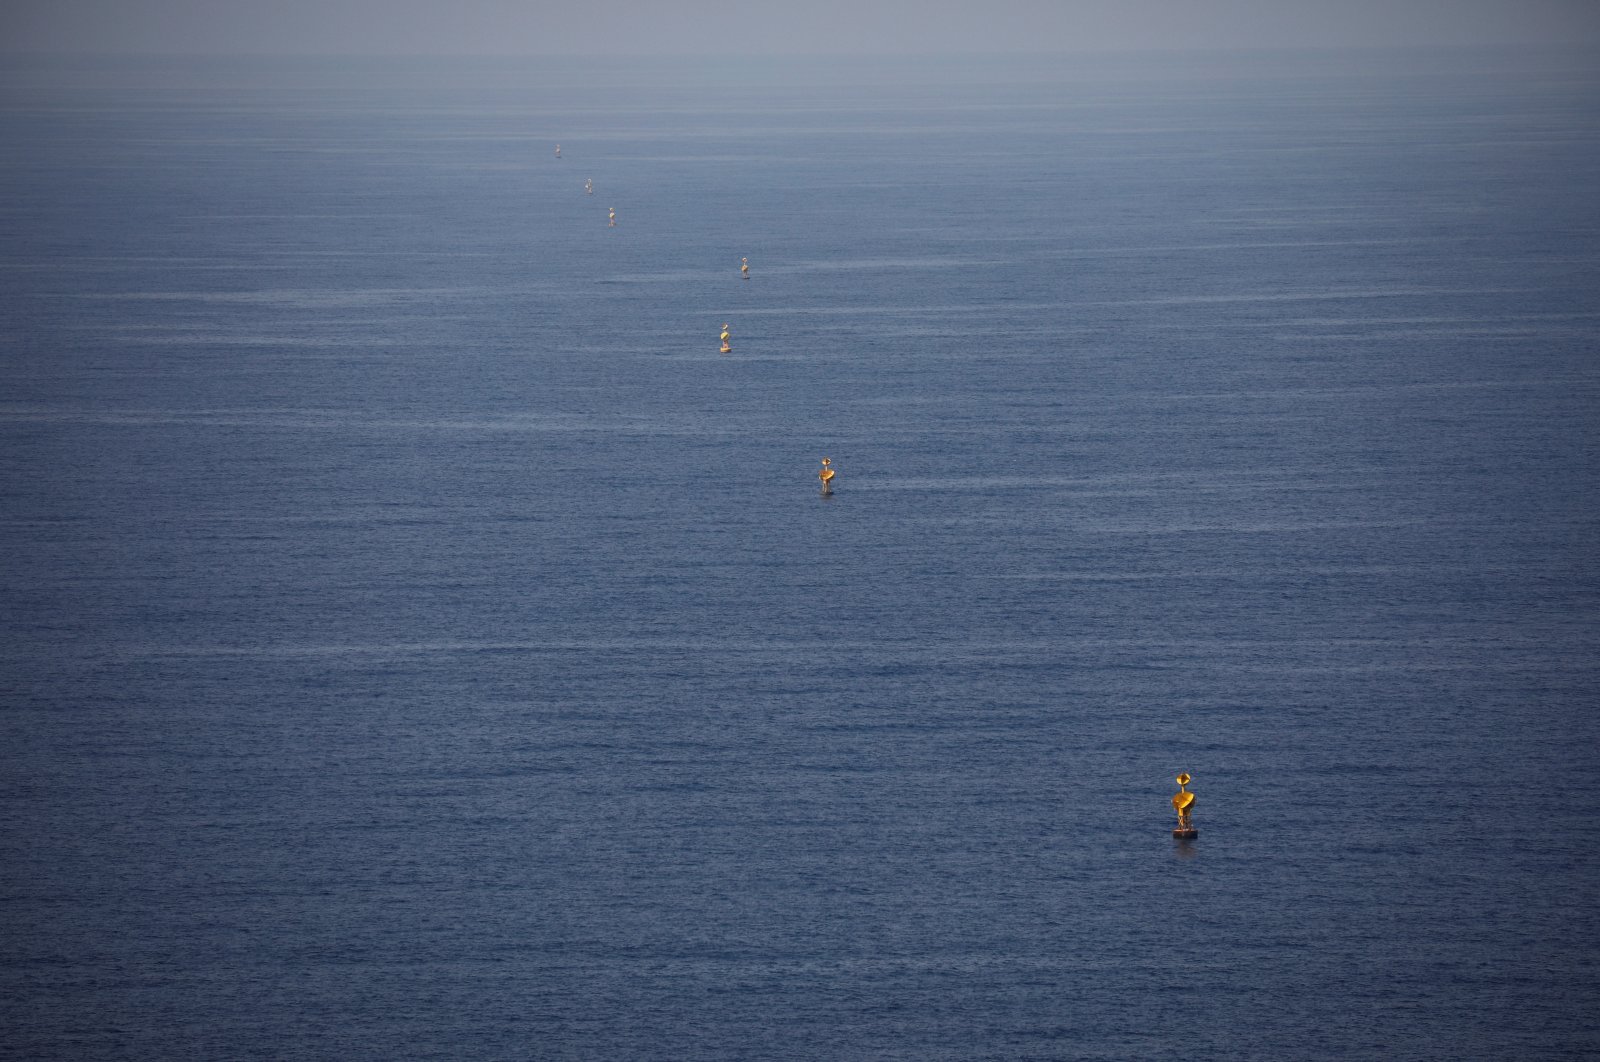 Maritime border markers are seen in the Mediterranean Sea near Lebanon, as seen from Rosh Hanikra, northern Israel, Oct. 28, 2020. (REUTERS Photo)